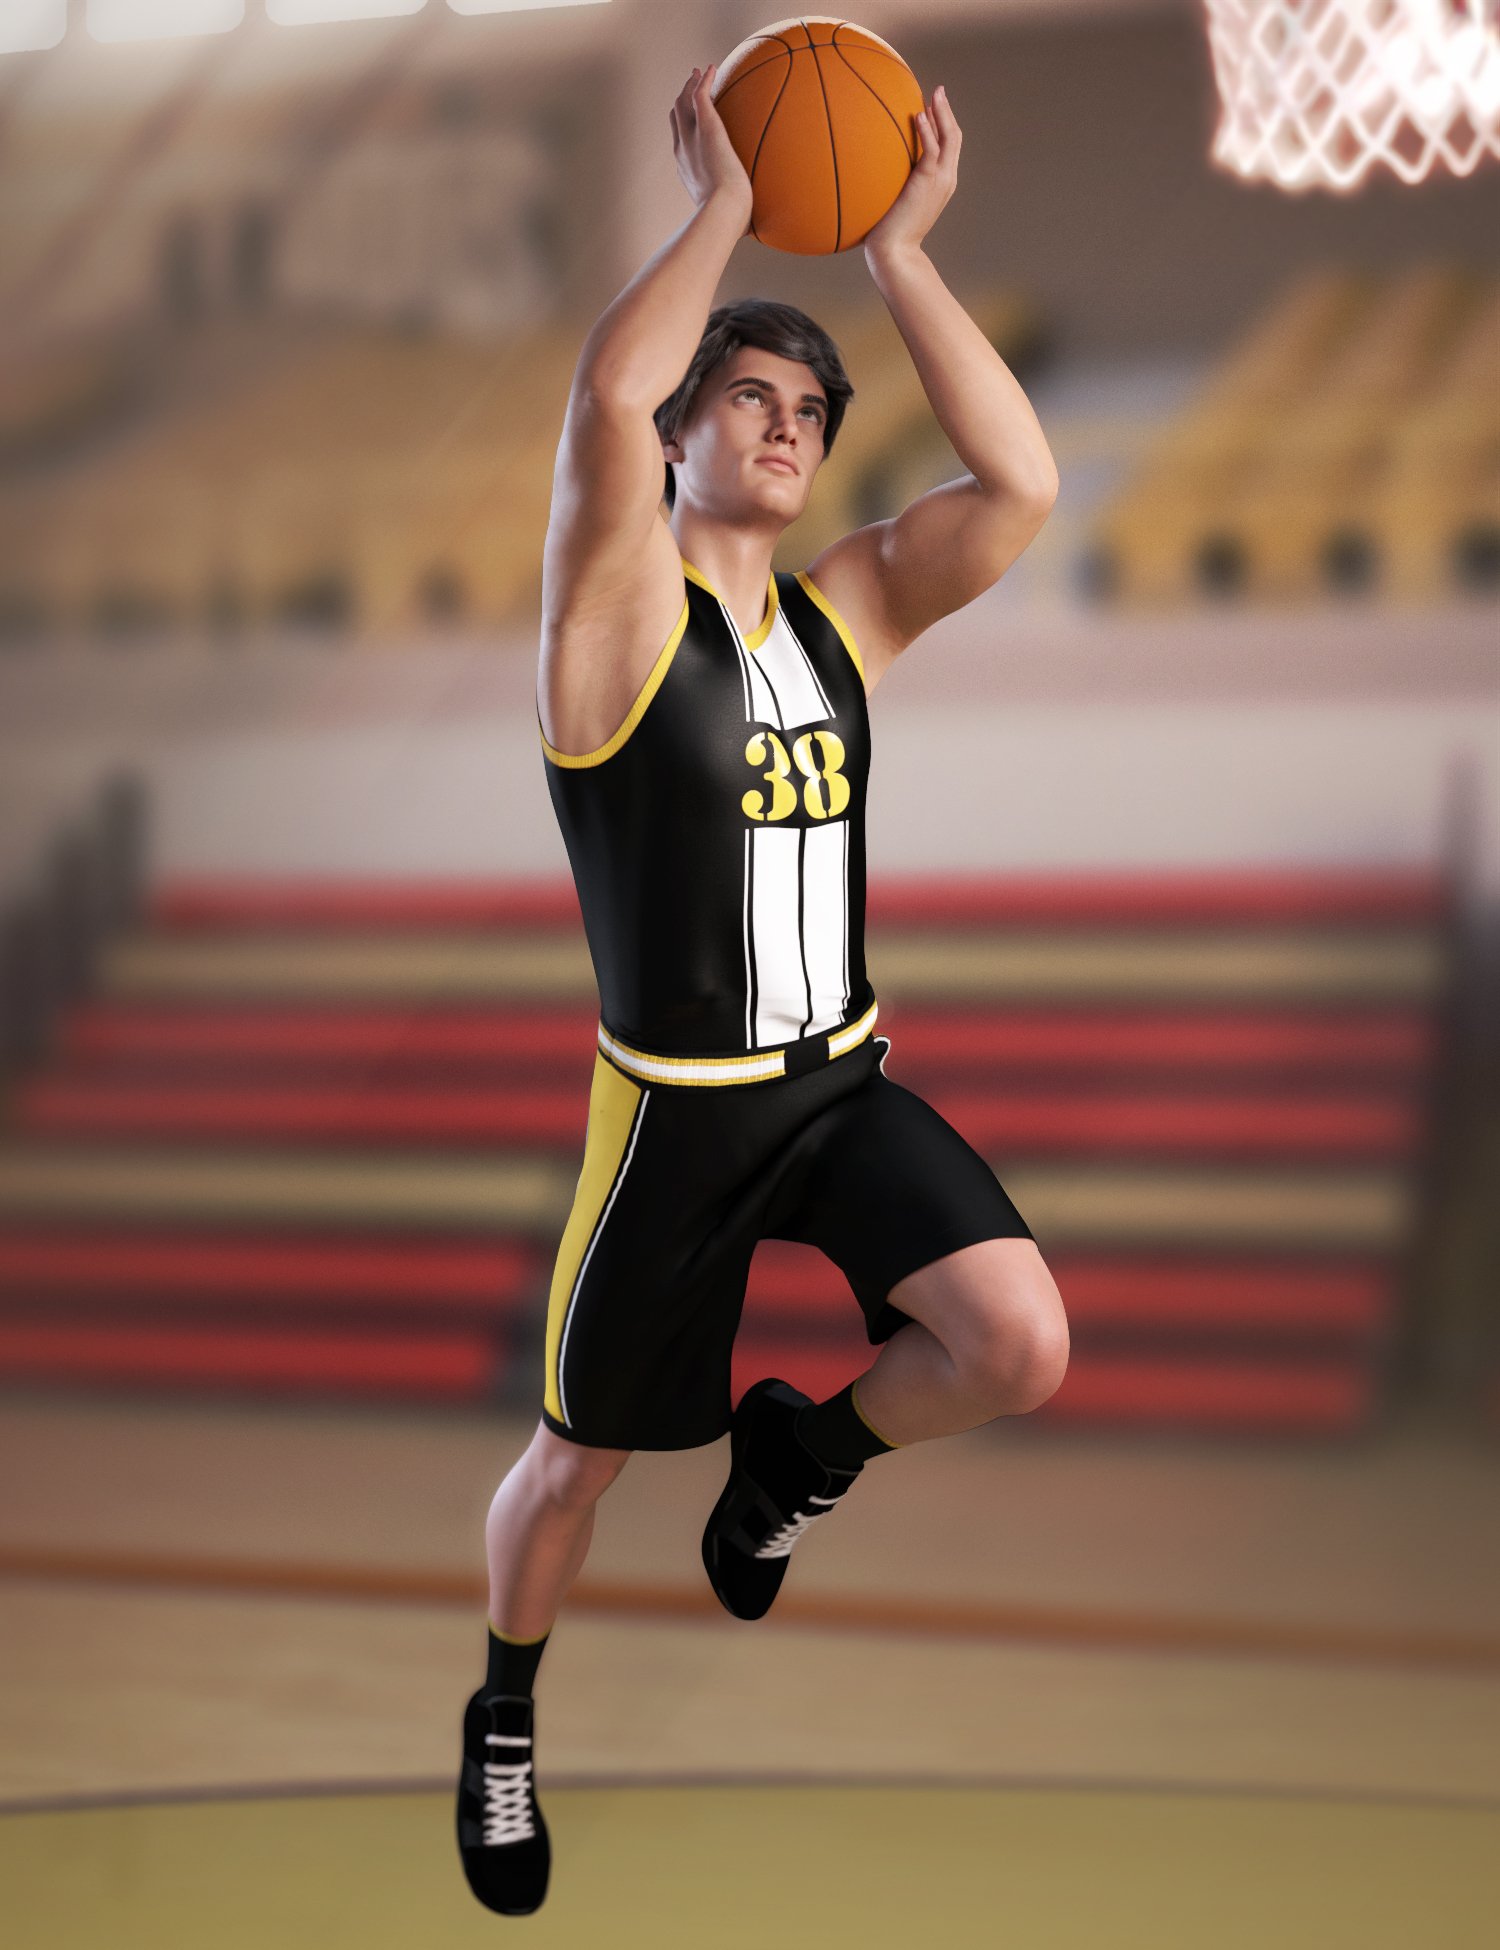 dForce Basketball Uniform Outfit for Genesis 8.1 Males